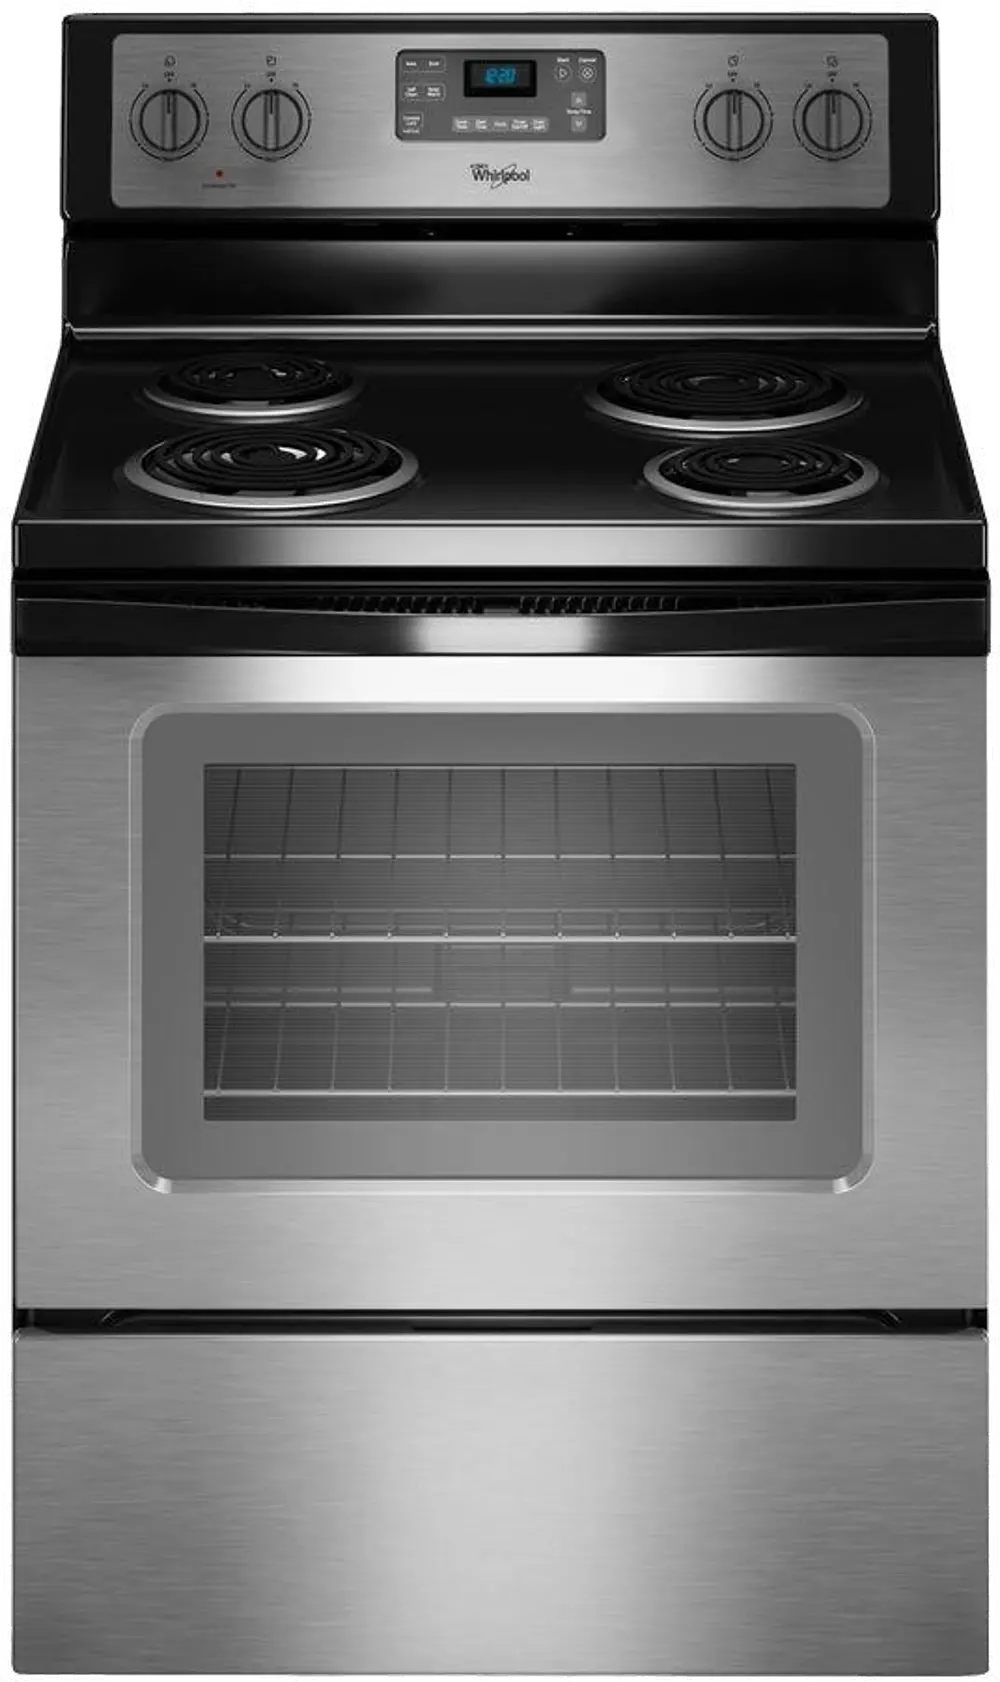 WFC310S0ES Whirlpool Electric Range - 4.8 cu. ft. Stainless Steel-1